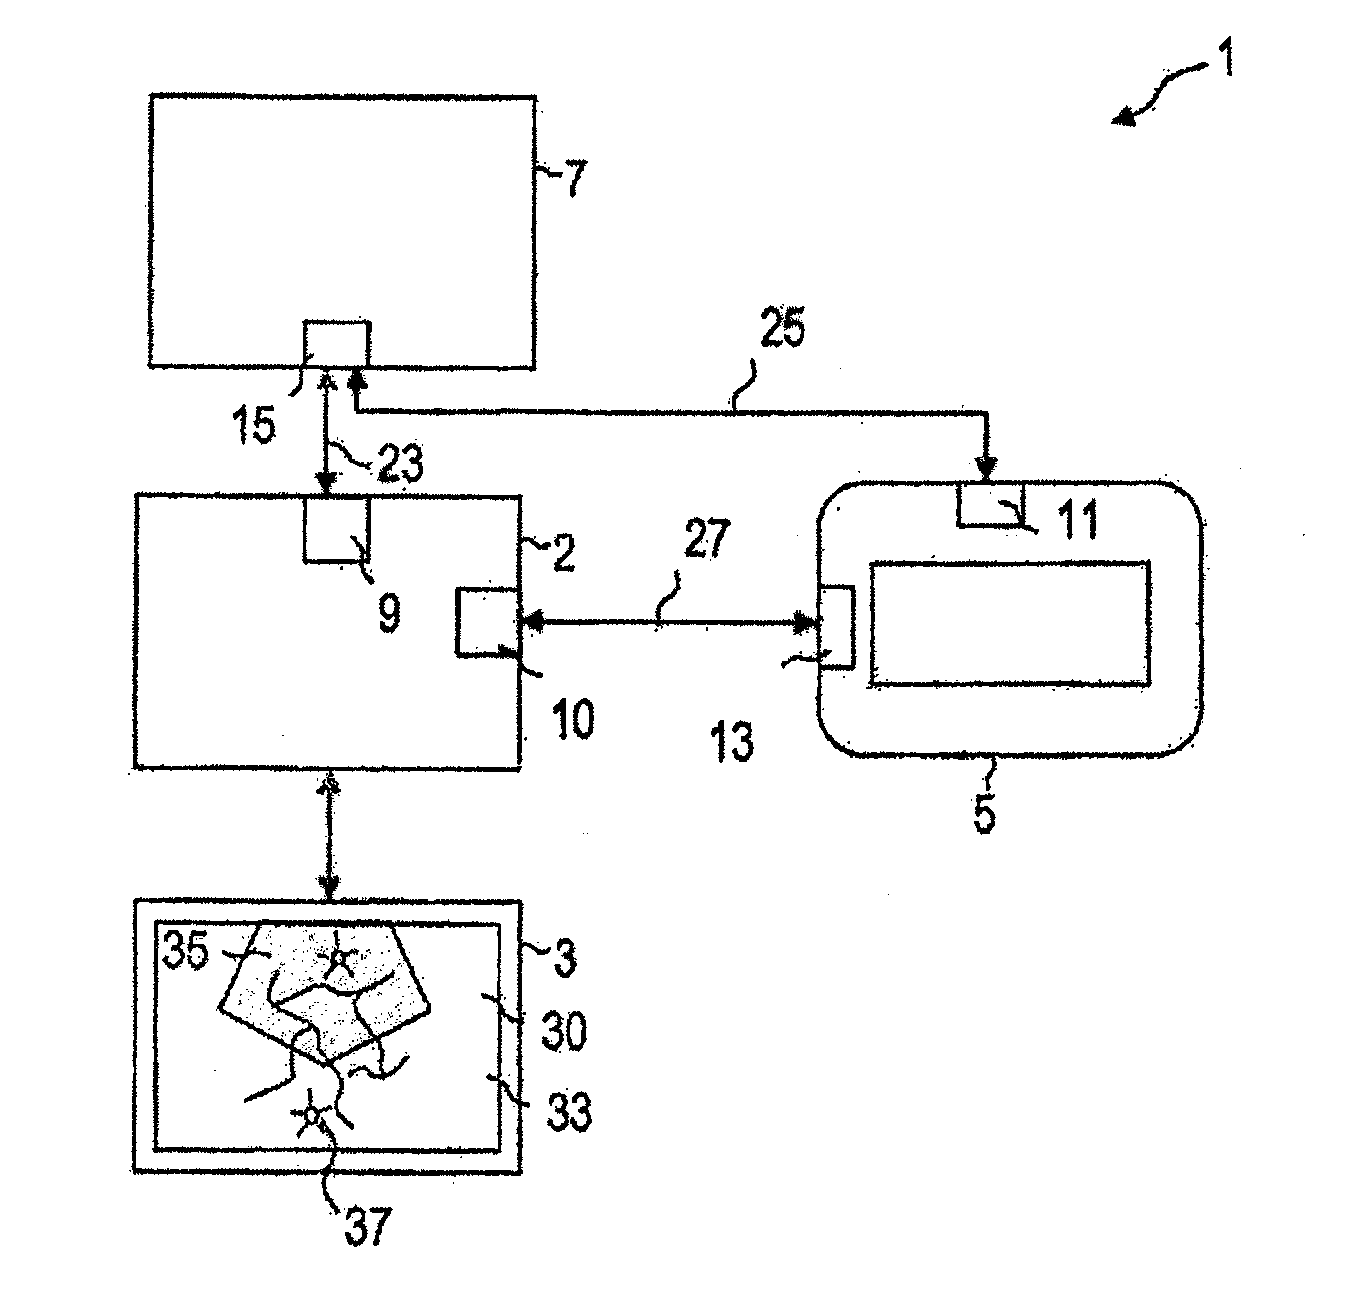 User Device and System